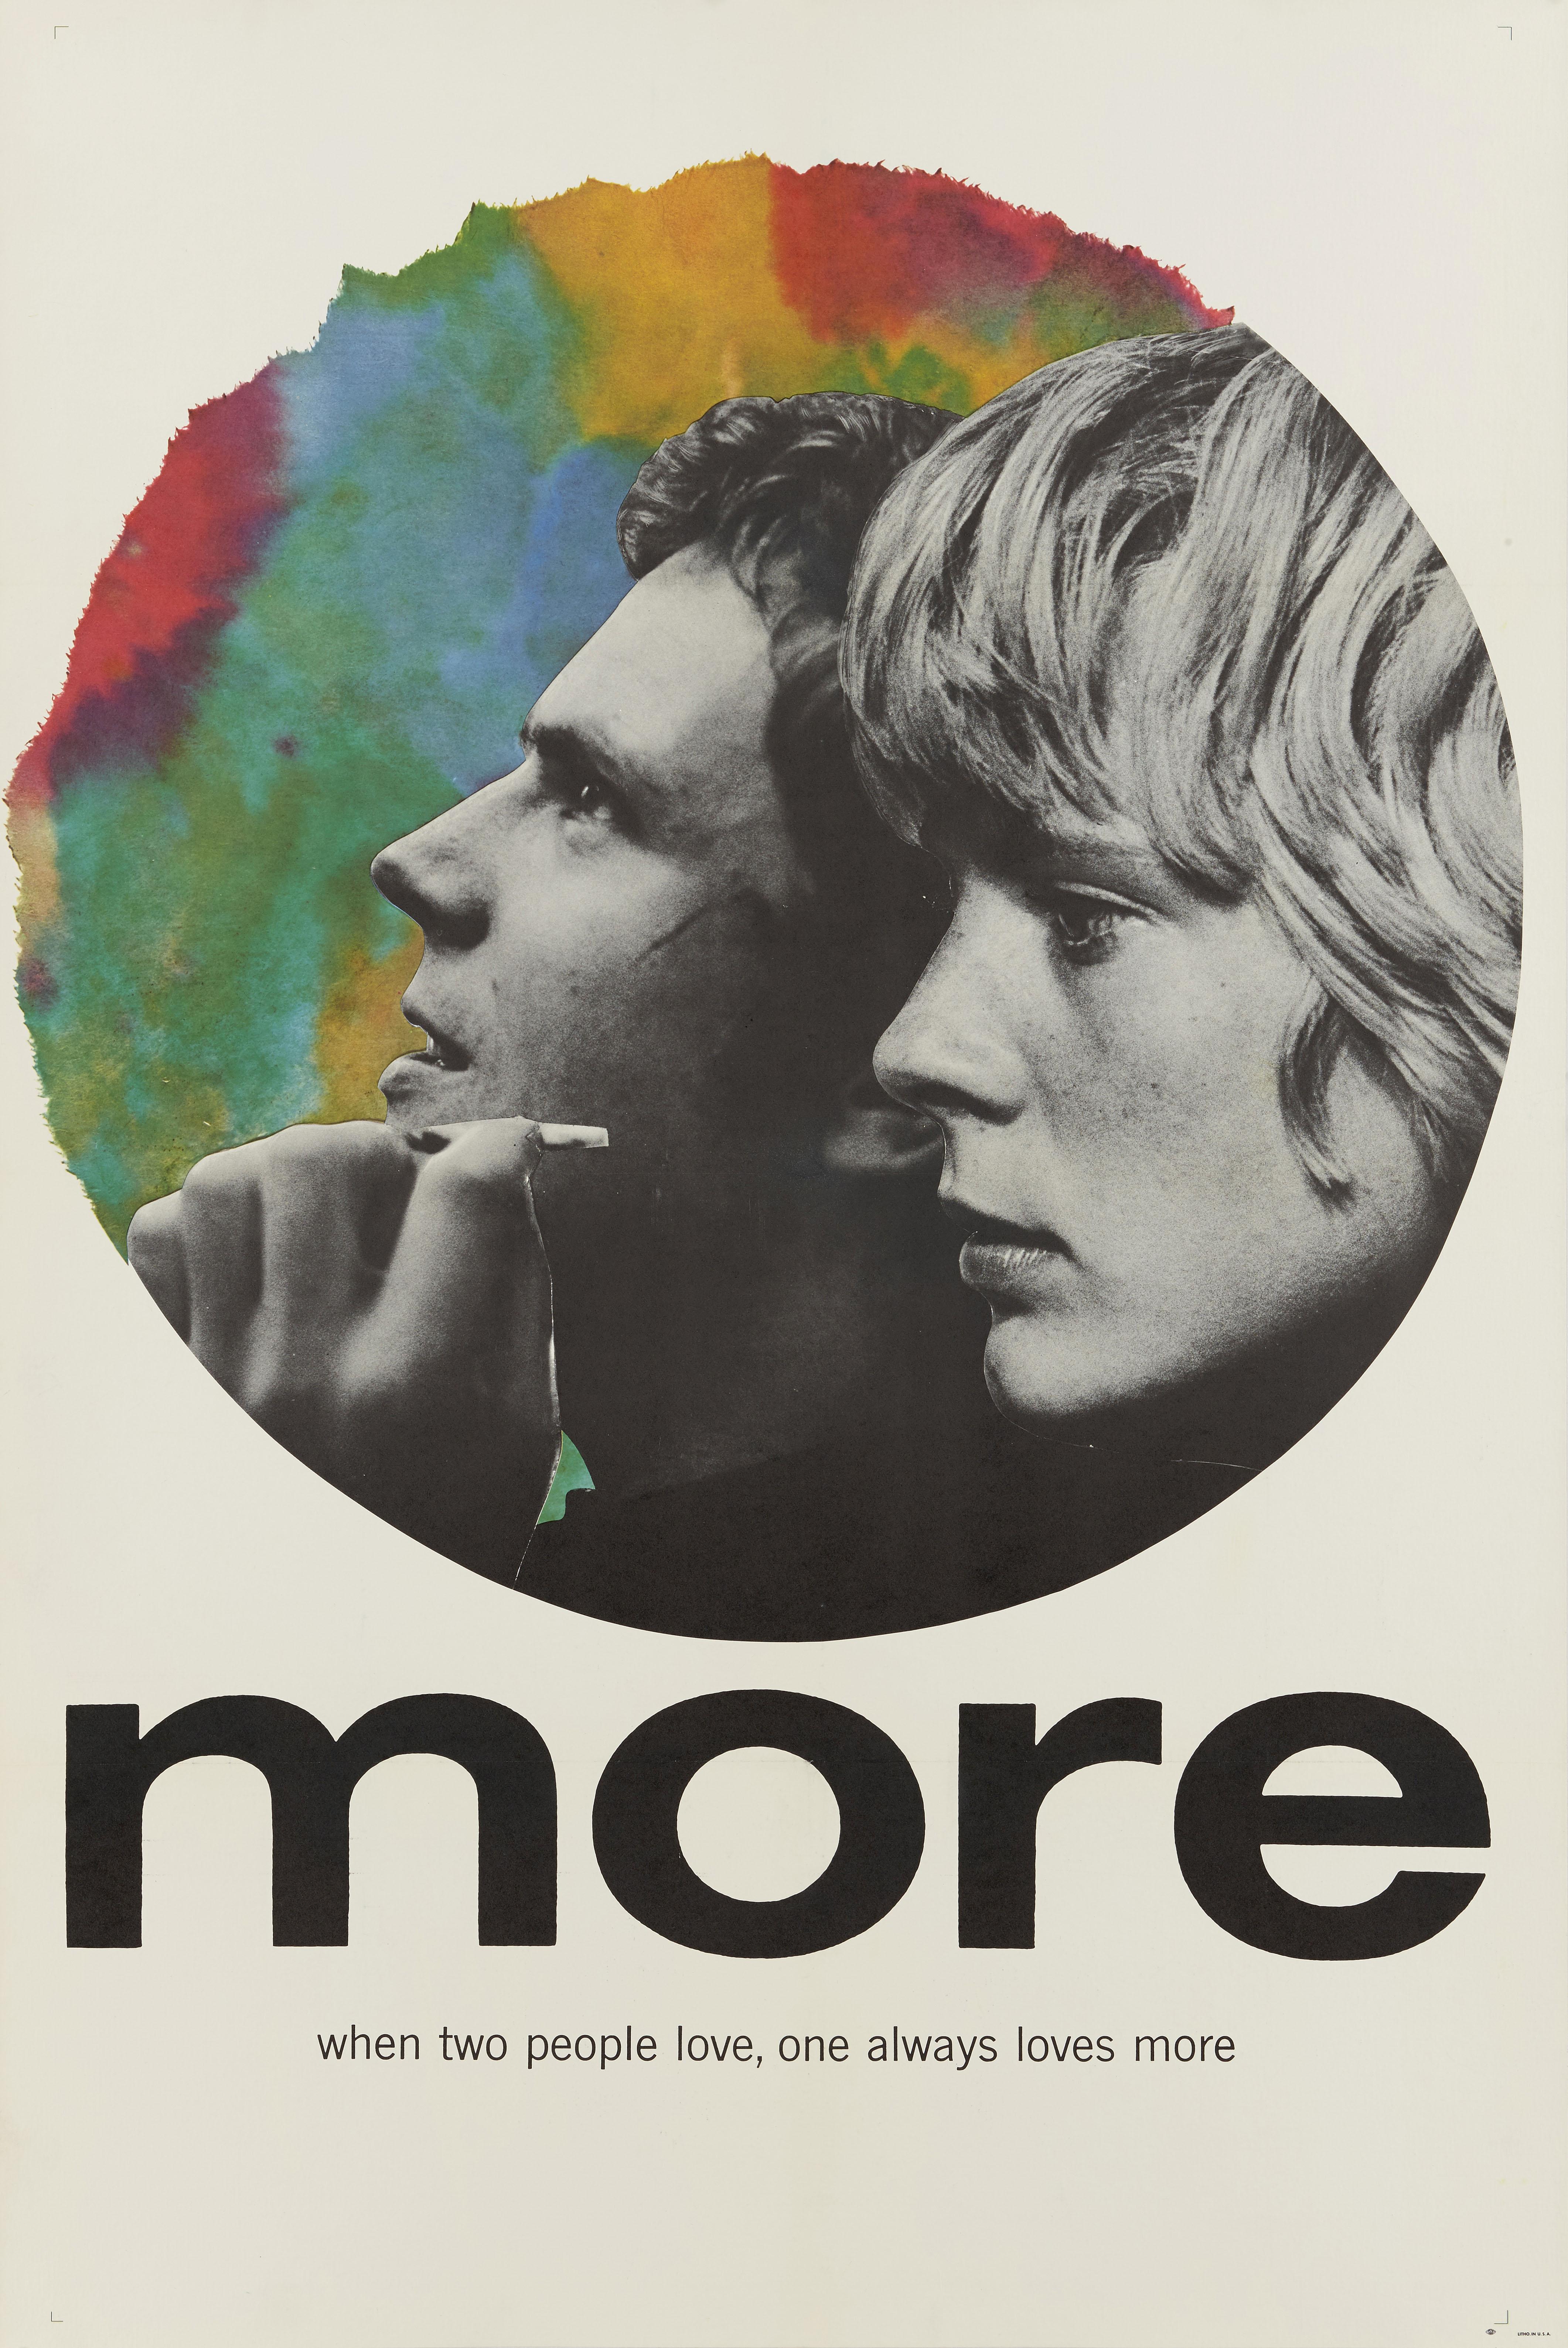 Original US style B film poster for 1969 Drama, Exploitation film More.
This film, which received critical acclaim when released, was written and directed by the multi-talented Barbet Schroeder, and was his theatrical feature film directorial